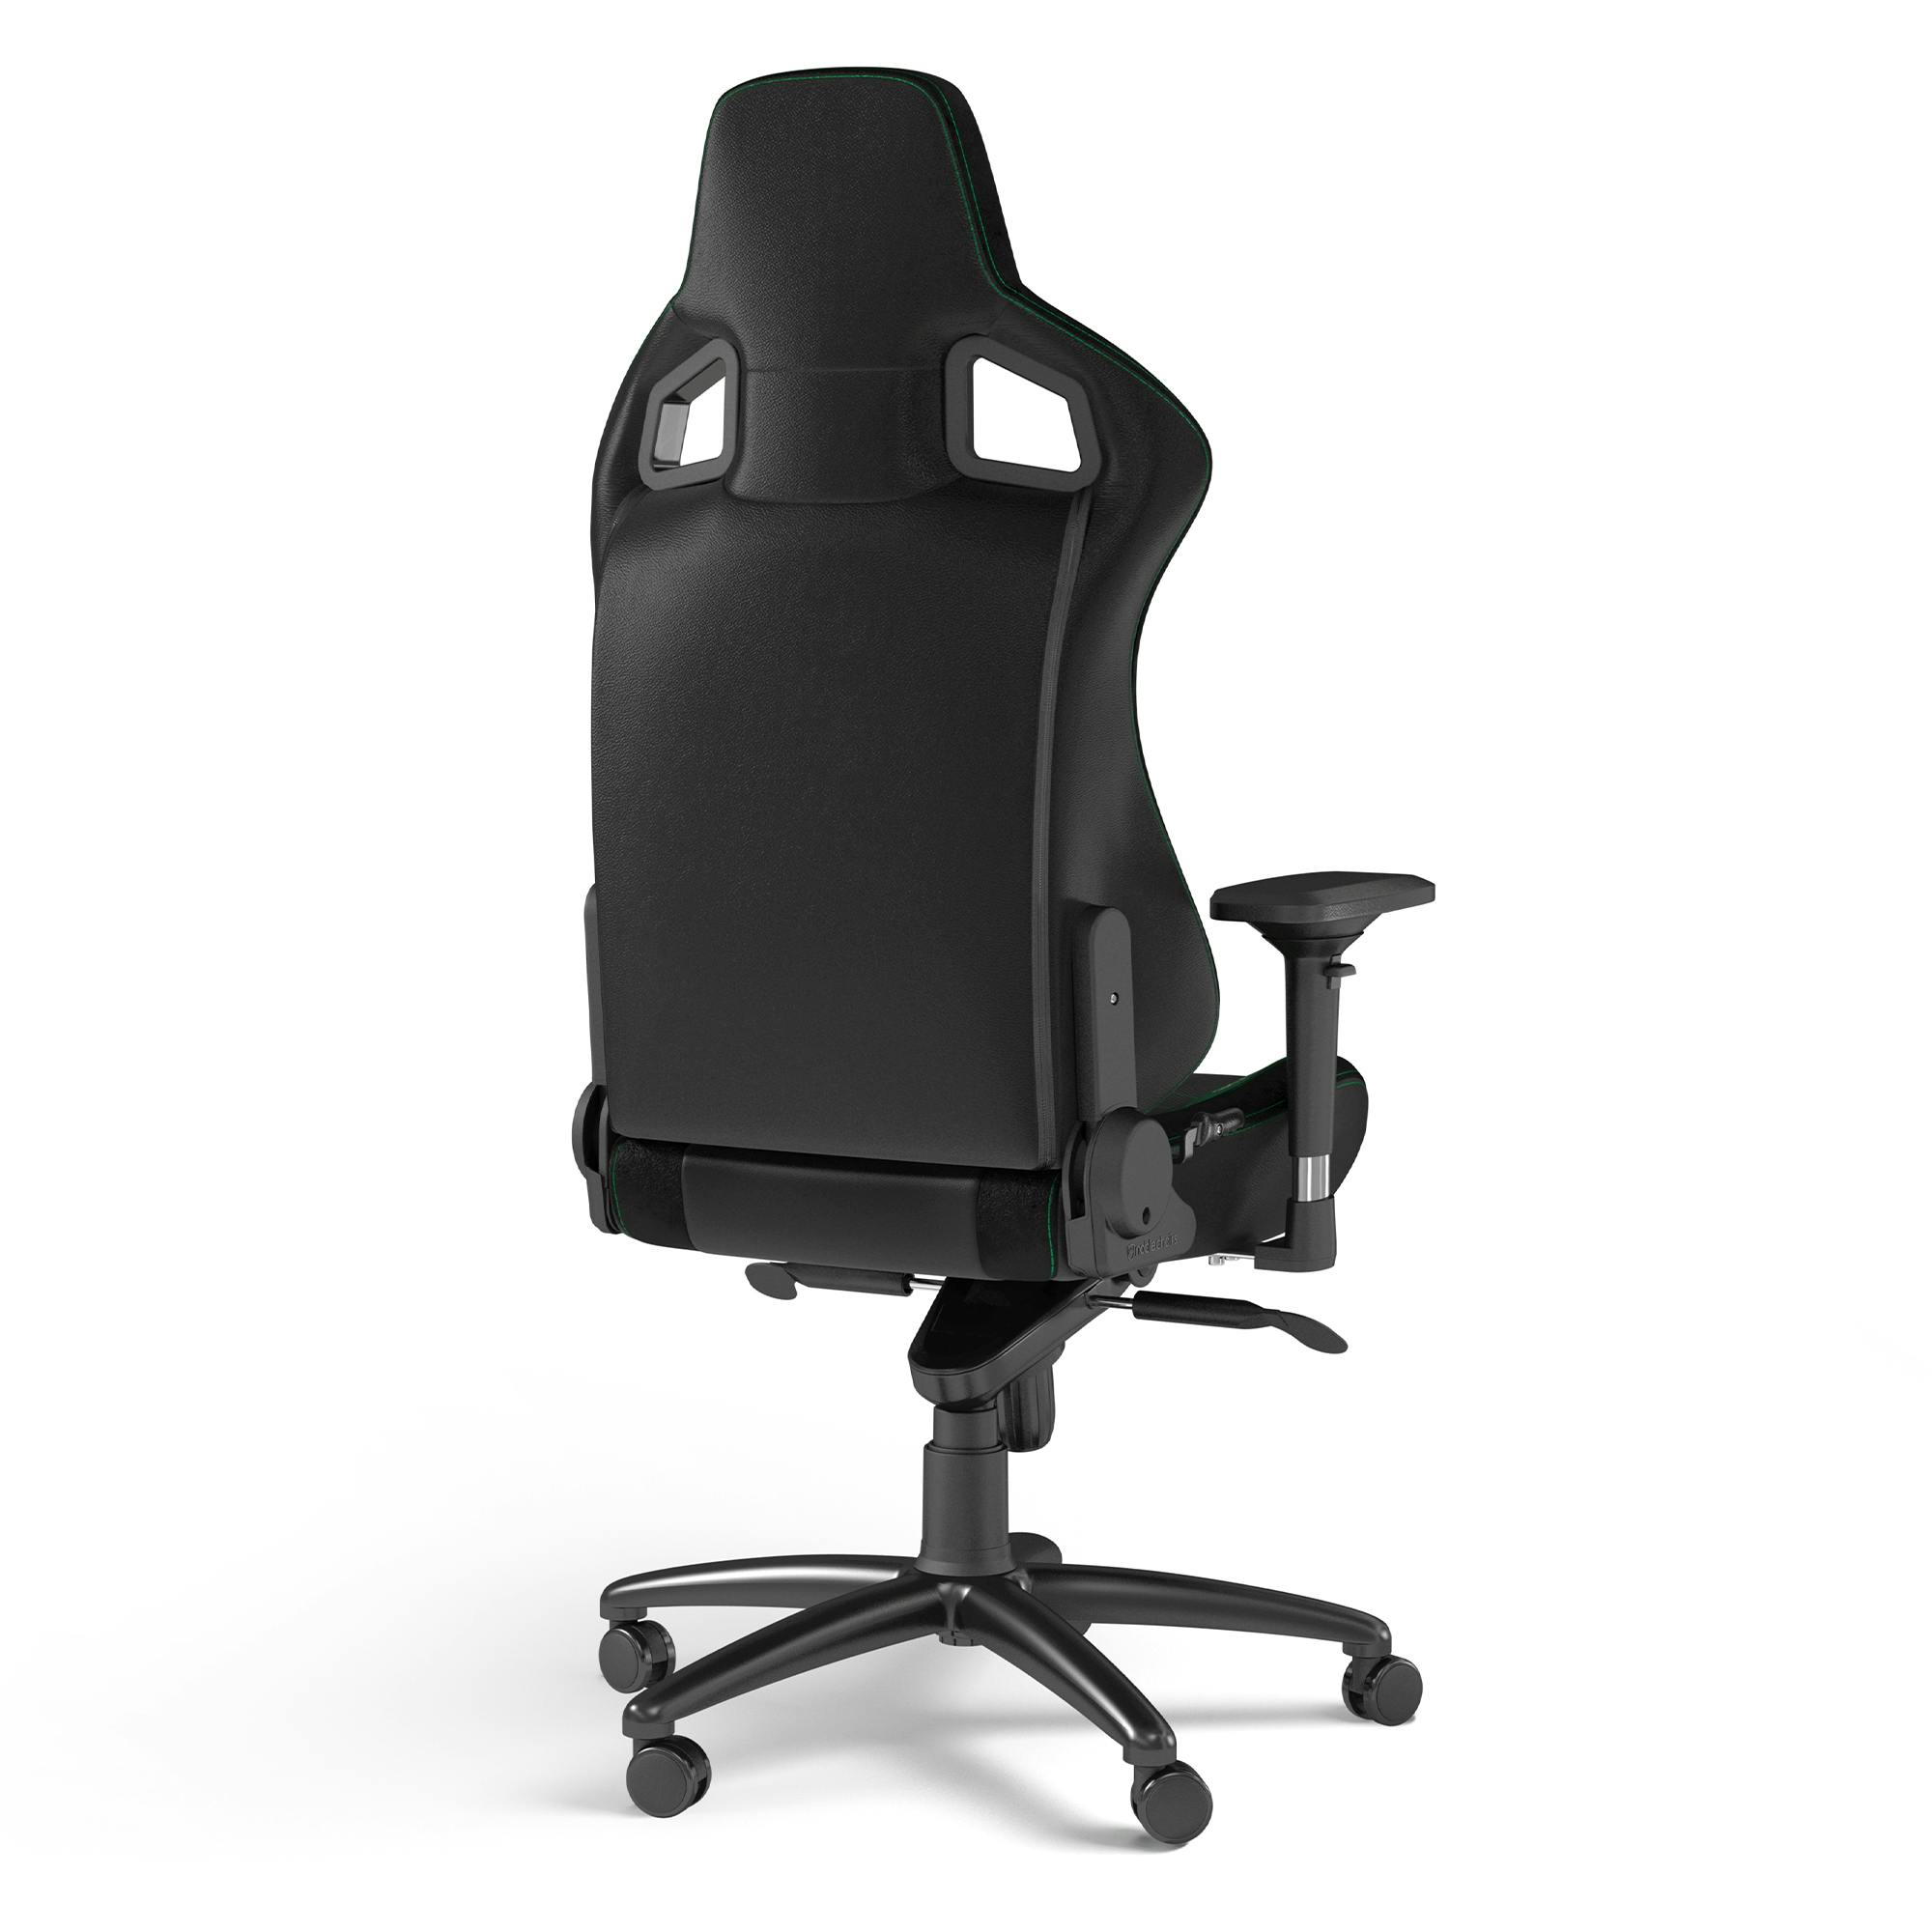 Noblechairs - EPIC Black/Green